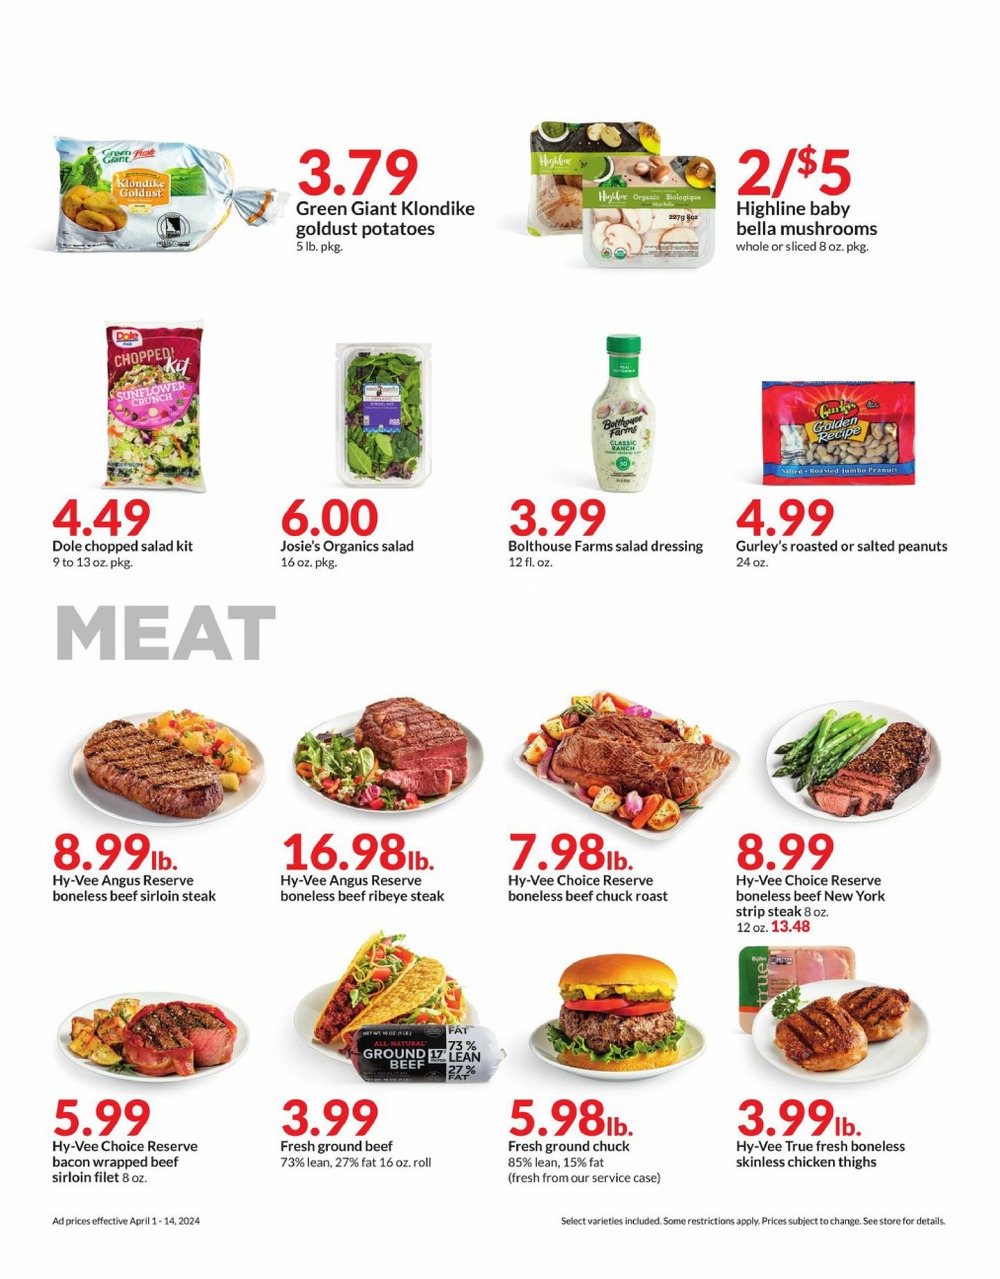 clements piggly wiggly weekly ad